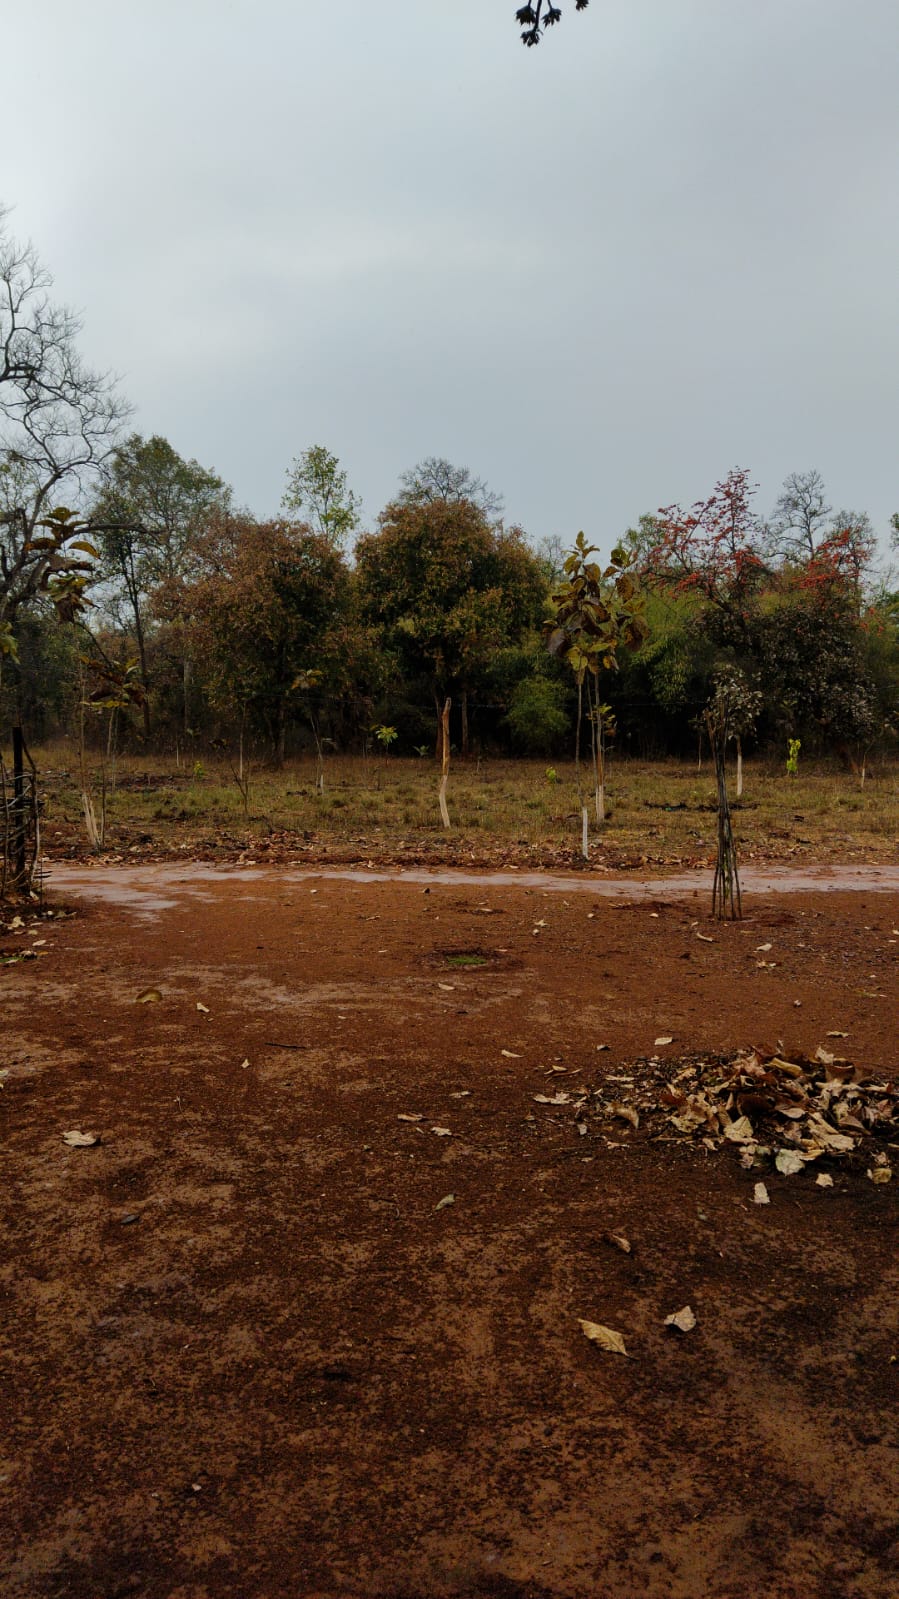 Image showcasing the effects of untimely rainfall in Bagdara Farms on both genetically modified and indigenous crops, highlighting the superior adaptability and resilience of the latter.